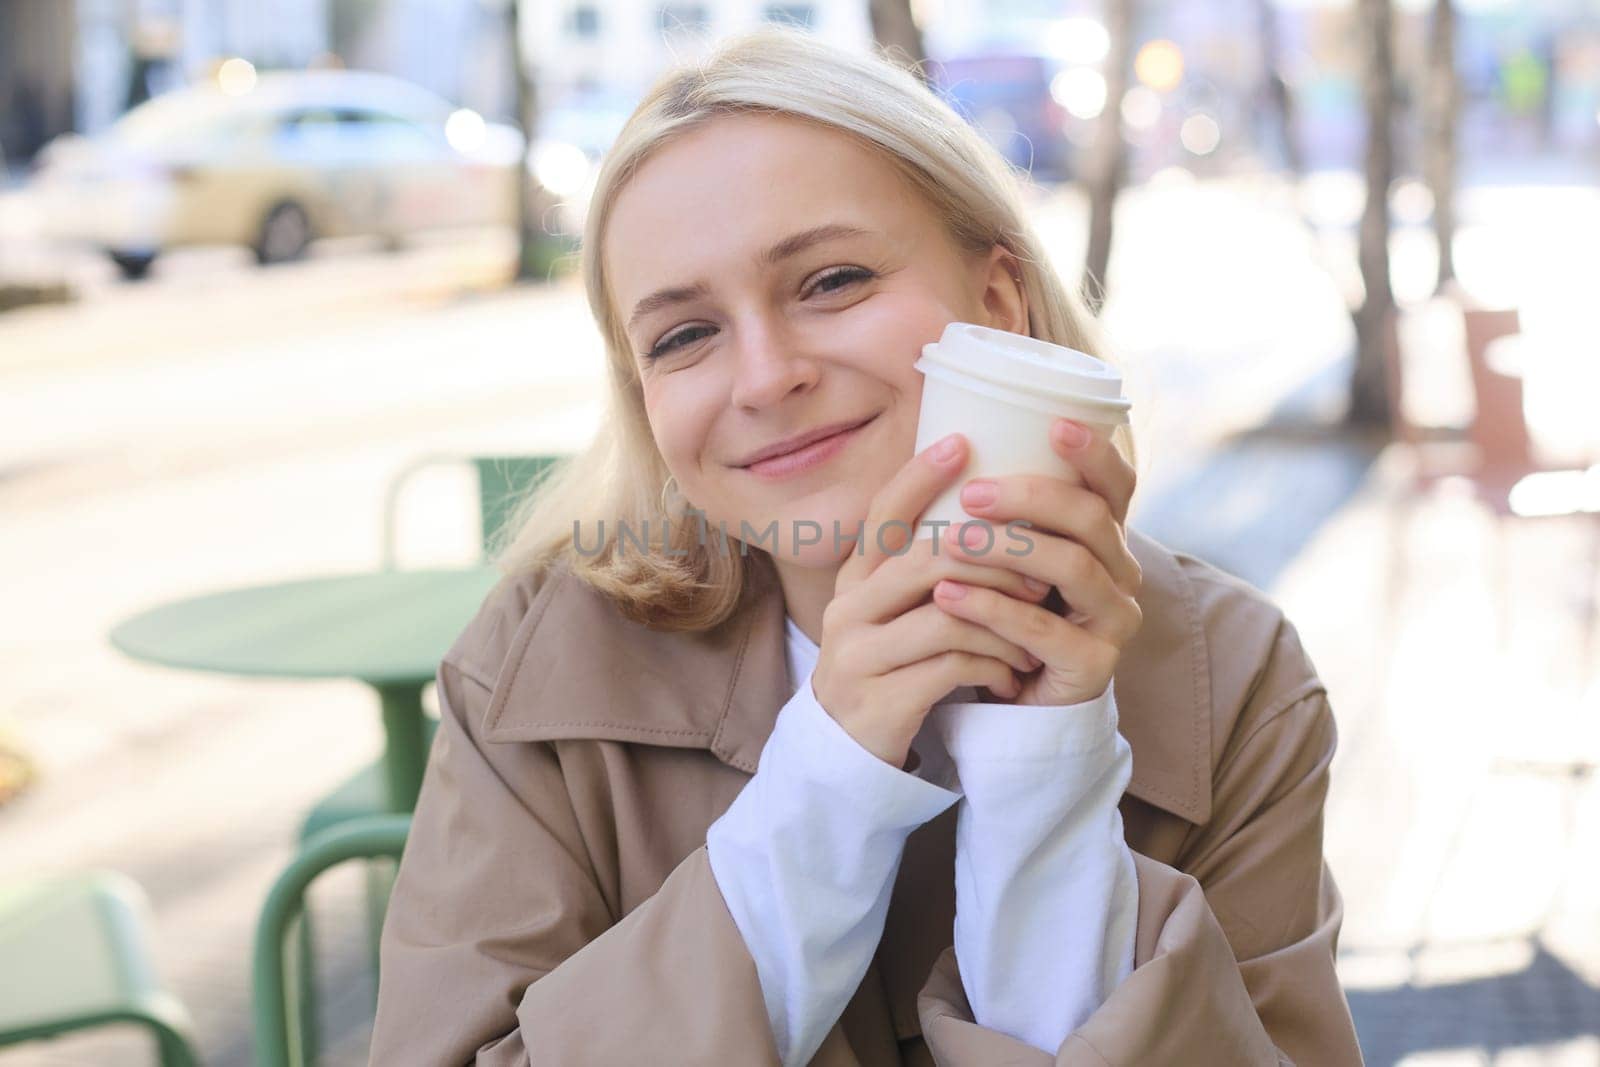 Close up portrait of smiling blond woman, holding cup of coffee, sitting in outdoor, street cafe, looking happy, waiting for someone in restaurant outside.